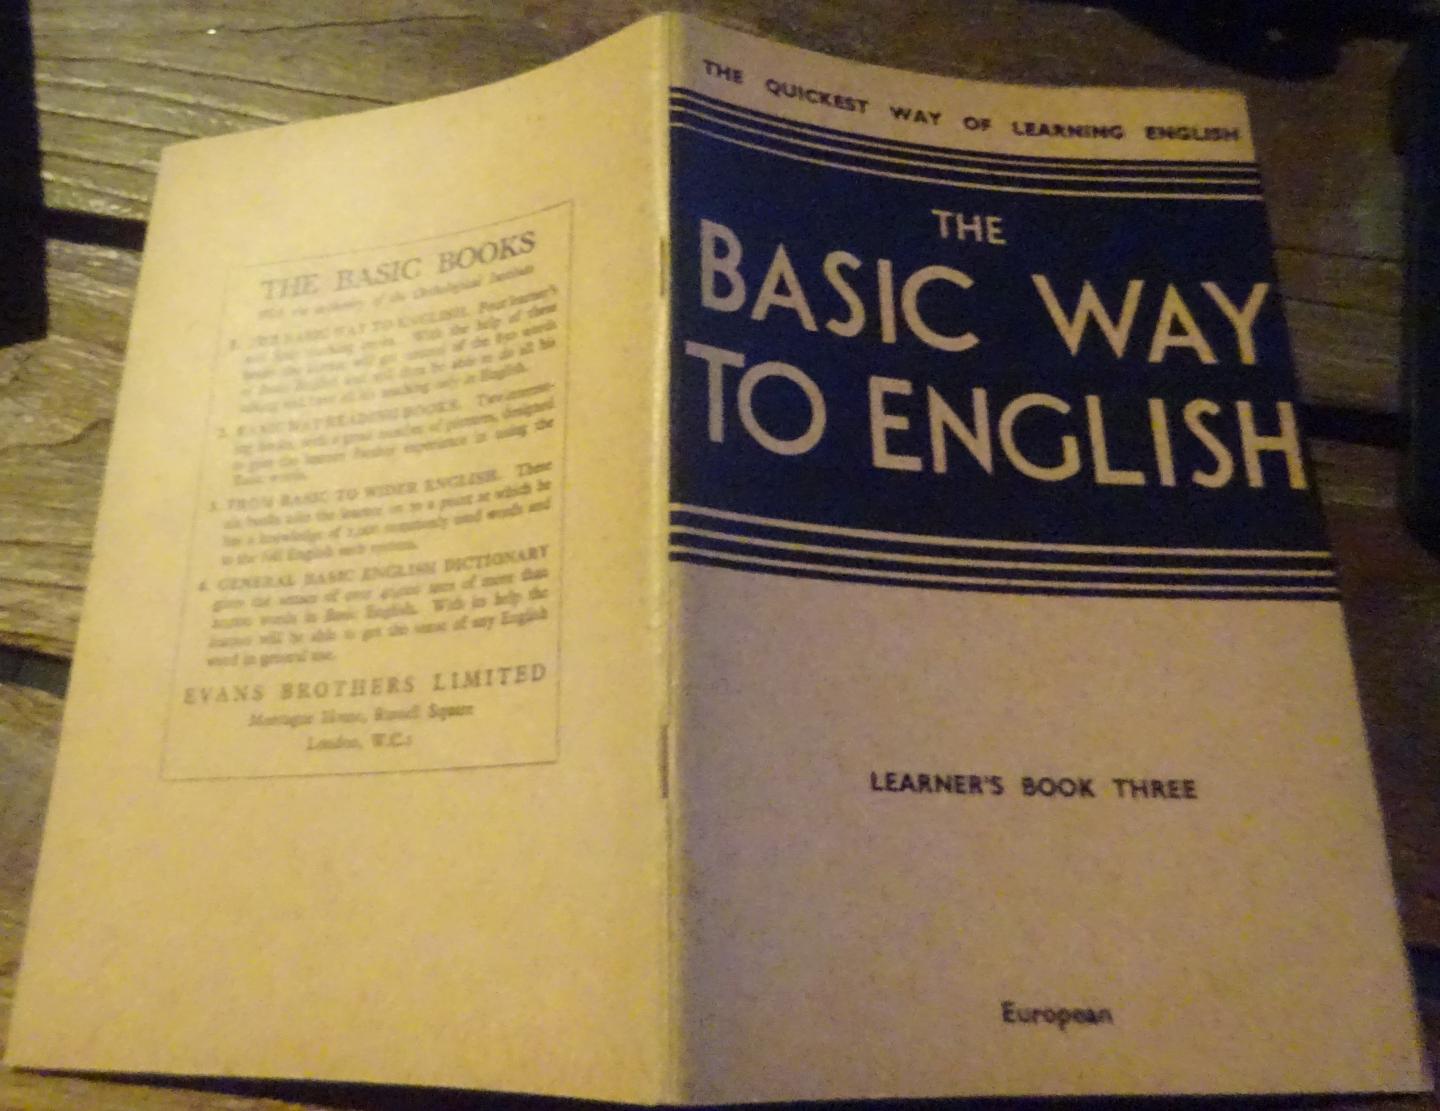 diverse - The Basic Way to English - Learner's book three